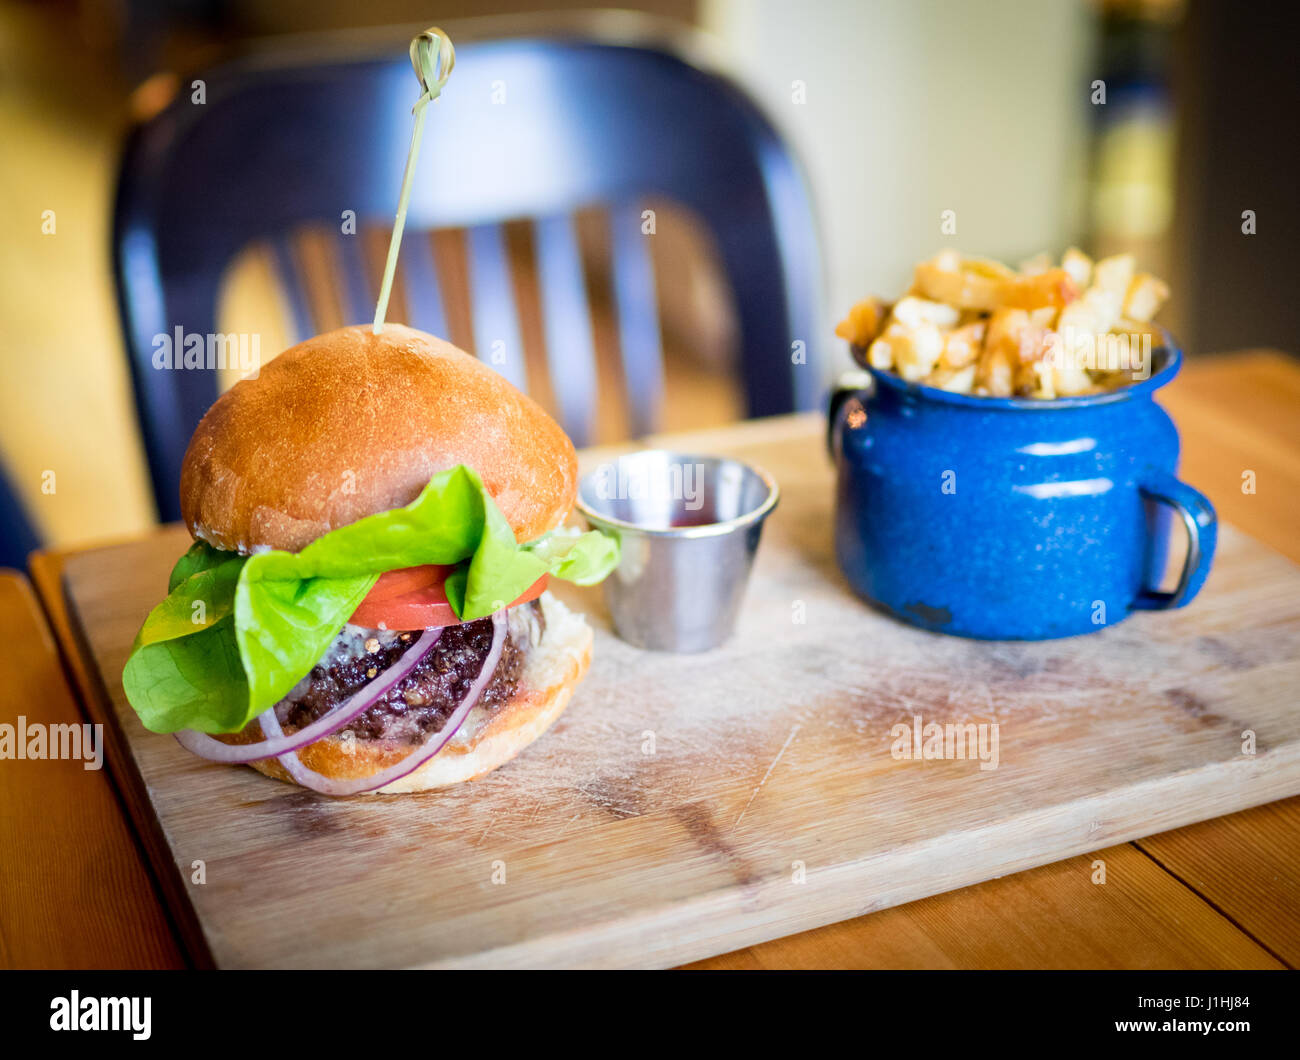 A classic burger and fries (hamburger and French fries) from Ayden Kitchen and Bar in Saskatoon, Saskatchewan, Canada. Stock Photo